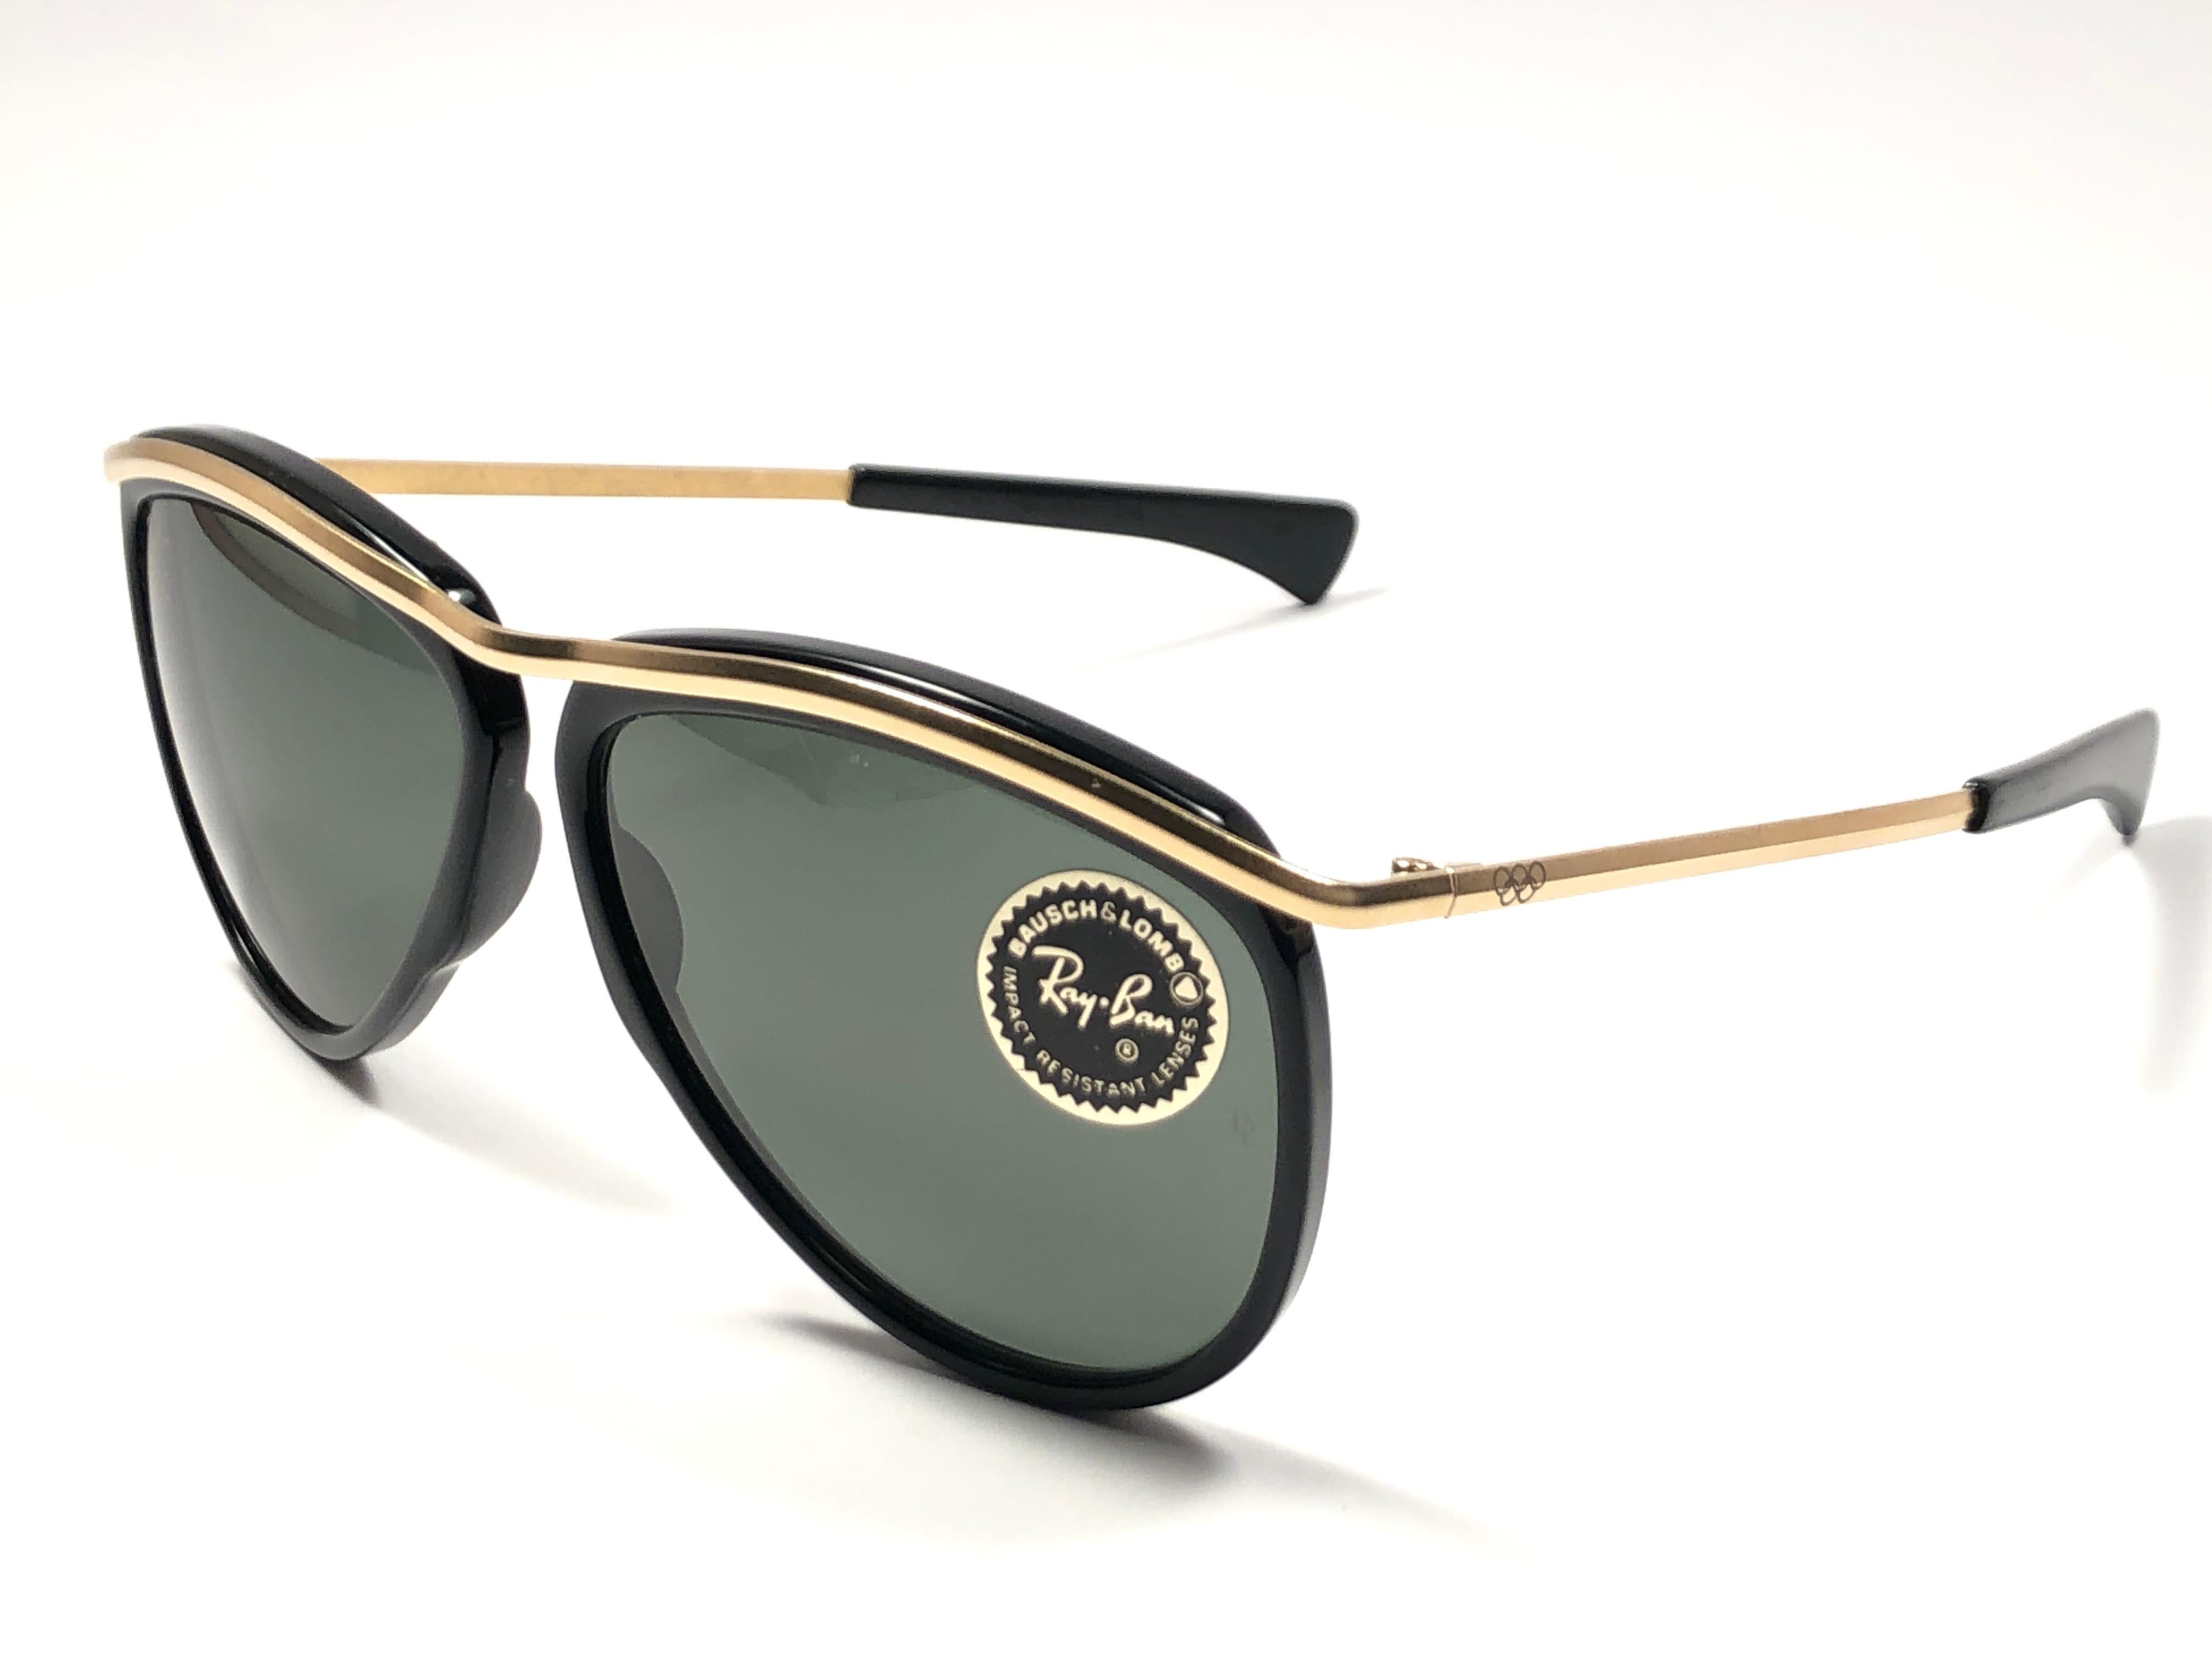 New Ray Ban Olympics Series Black & Gold G15 Lenses 1992 B&L USA 80's Sunglasses In New Condition For Sale In Baleares, Baleares